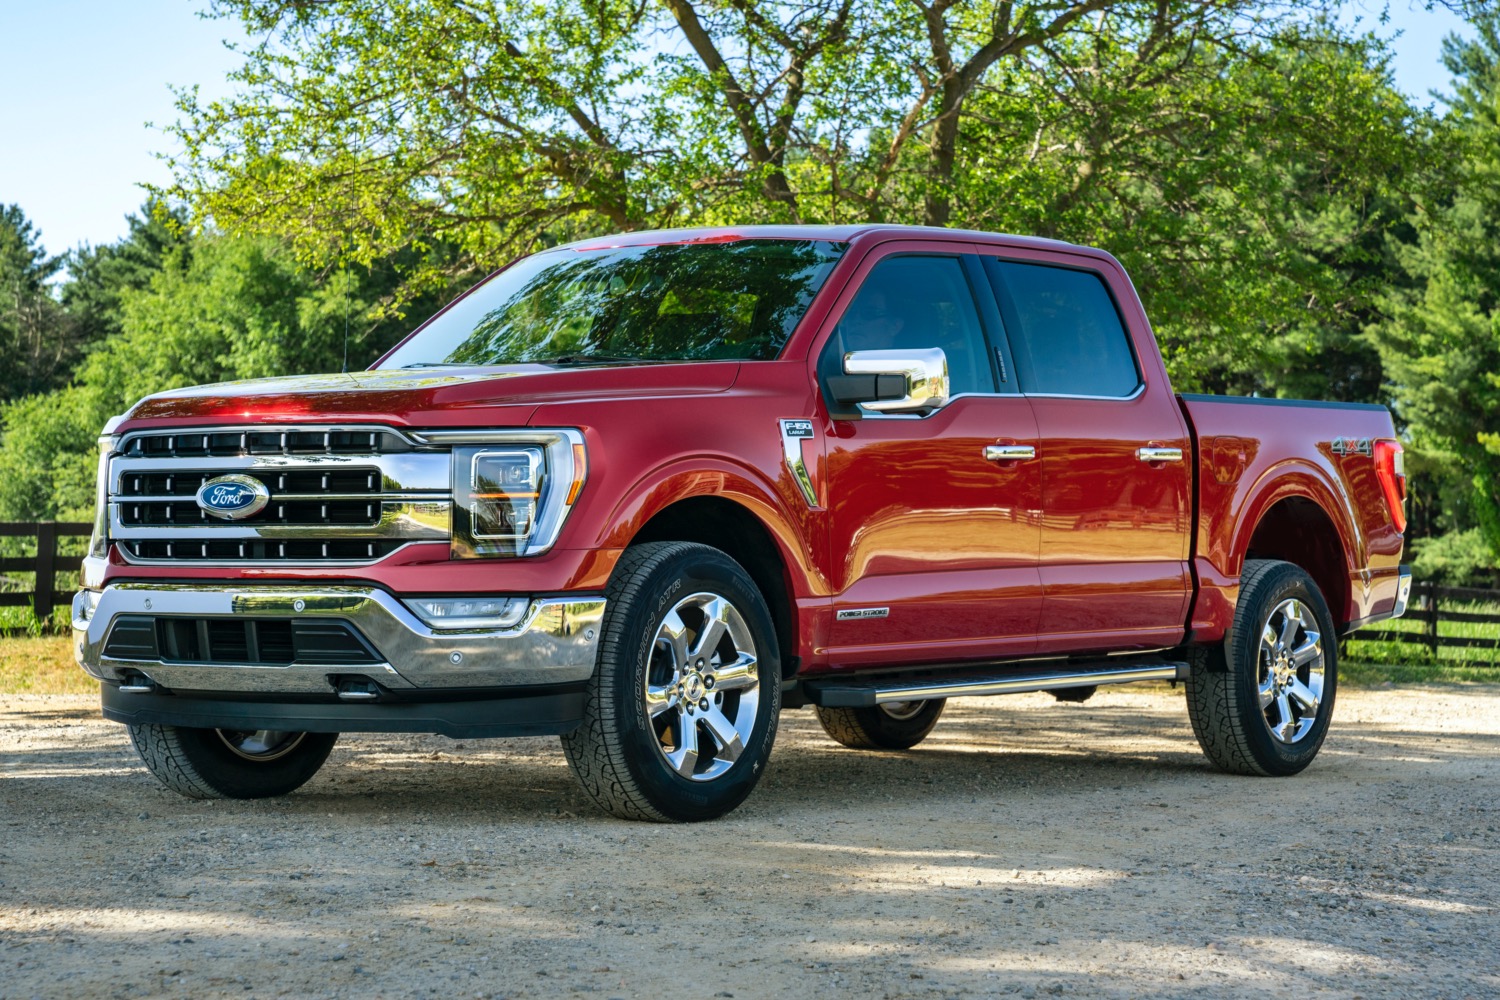 2021 Ford F-150 Can Be Built Without Start-Stop Under New Plan